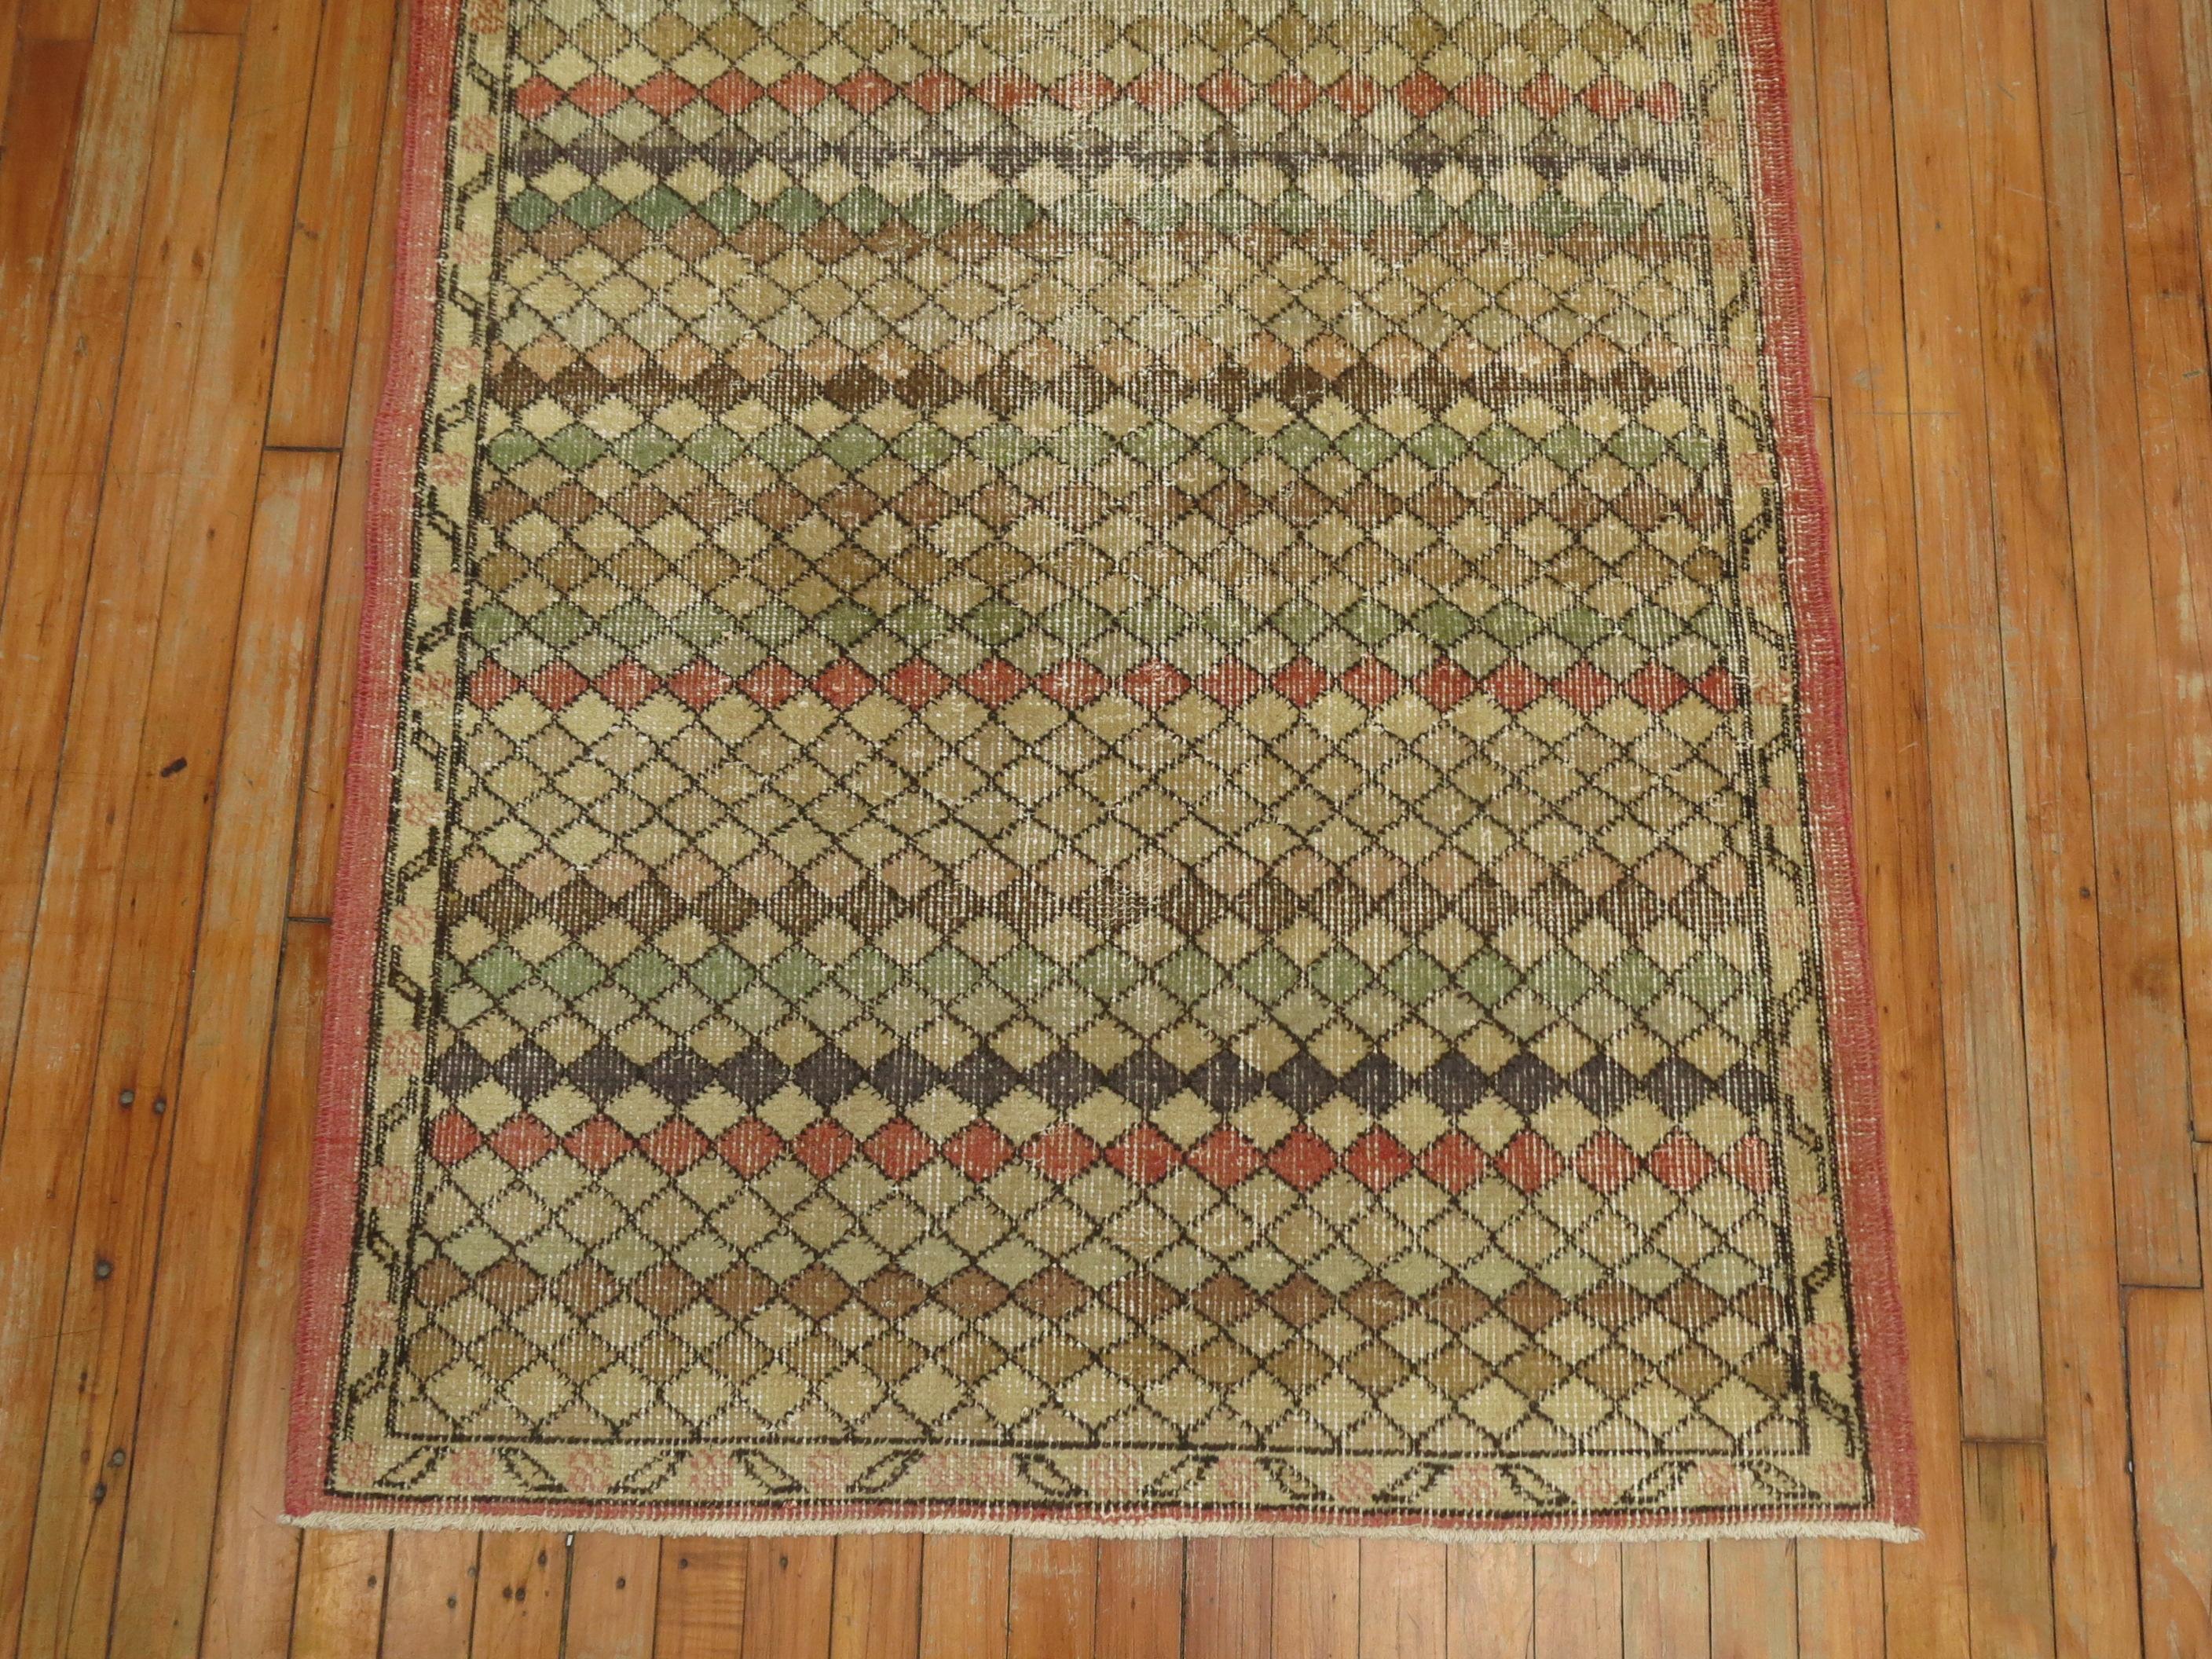 Turkish deco small runner with faded predominant accents in rose, brown green, circa mid-20th century.

Measures: 3'6